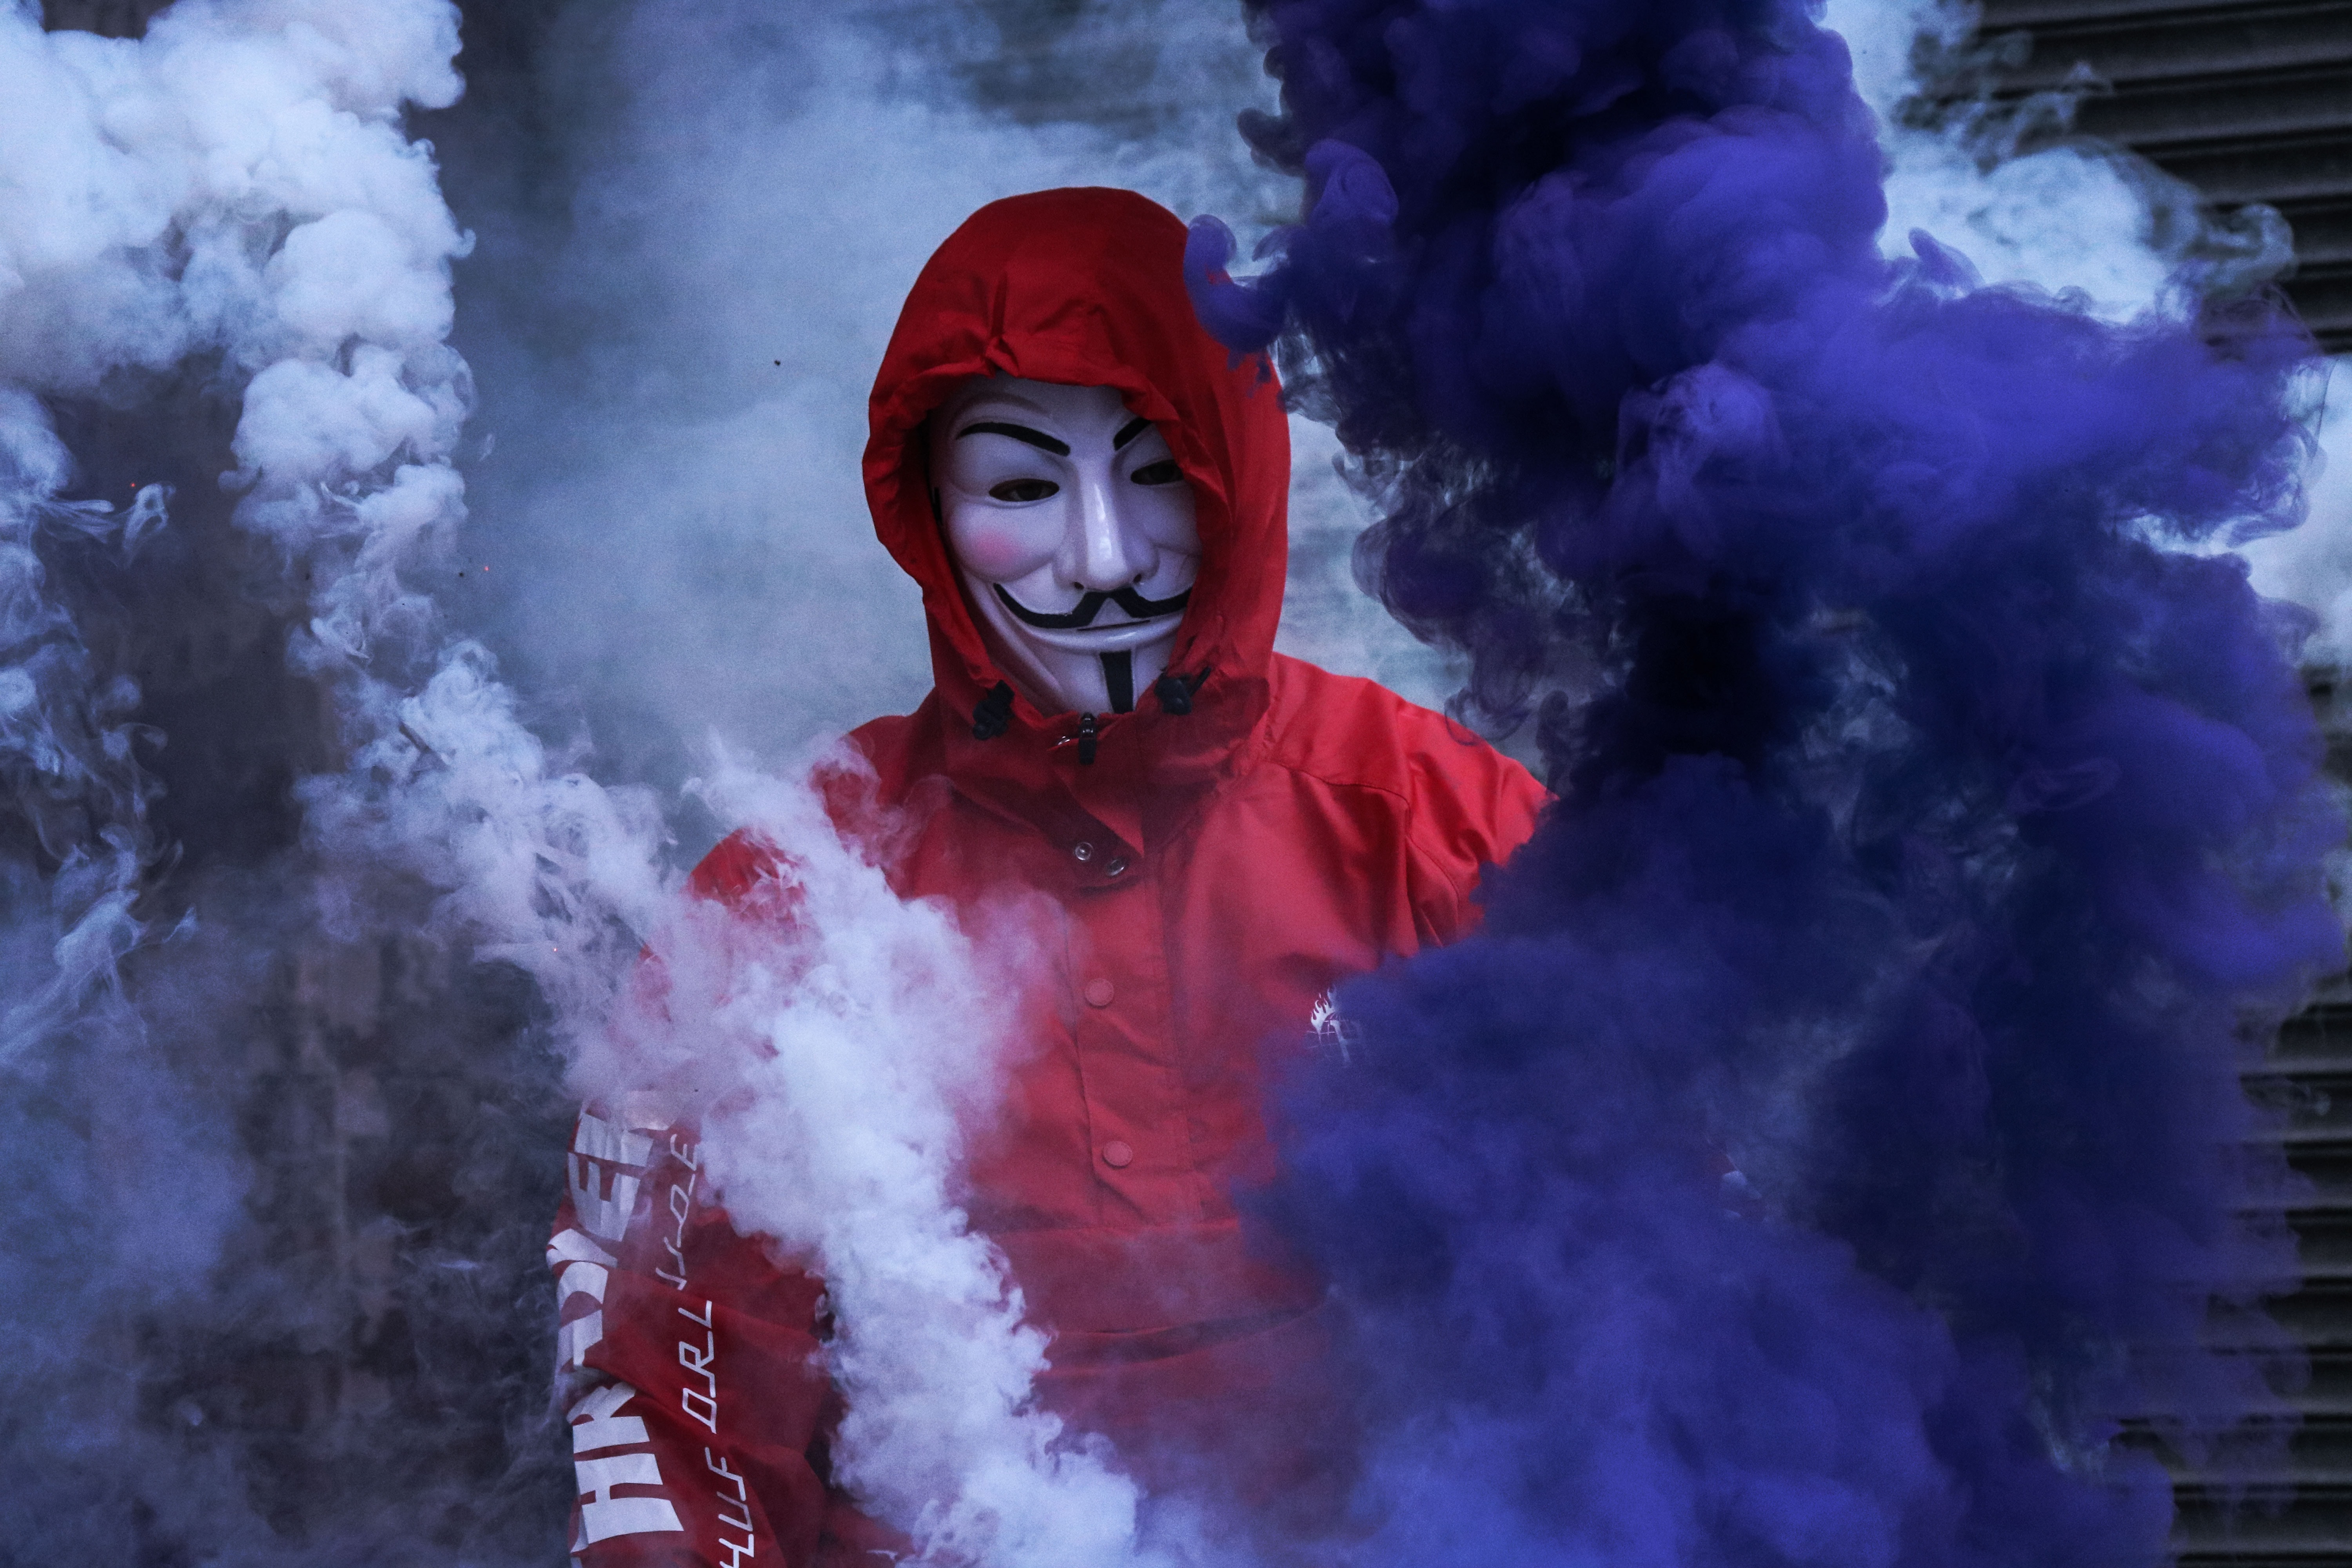 79524 download wallpaper anonymous, smoke, miscellanea, miscellaneous, mask, smoke bomb screensavers and pictures for free